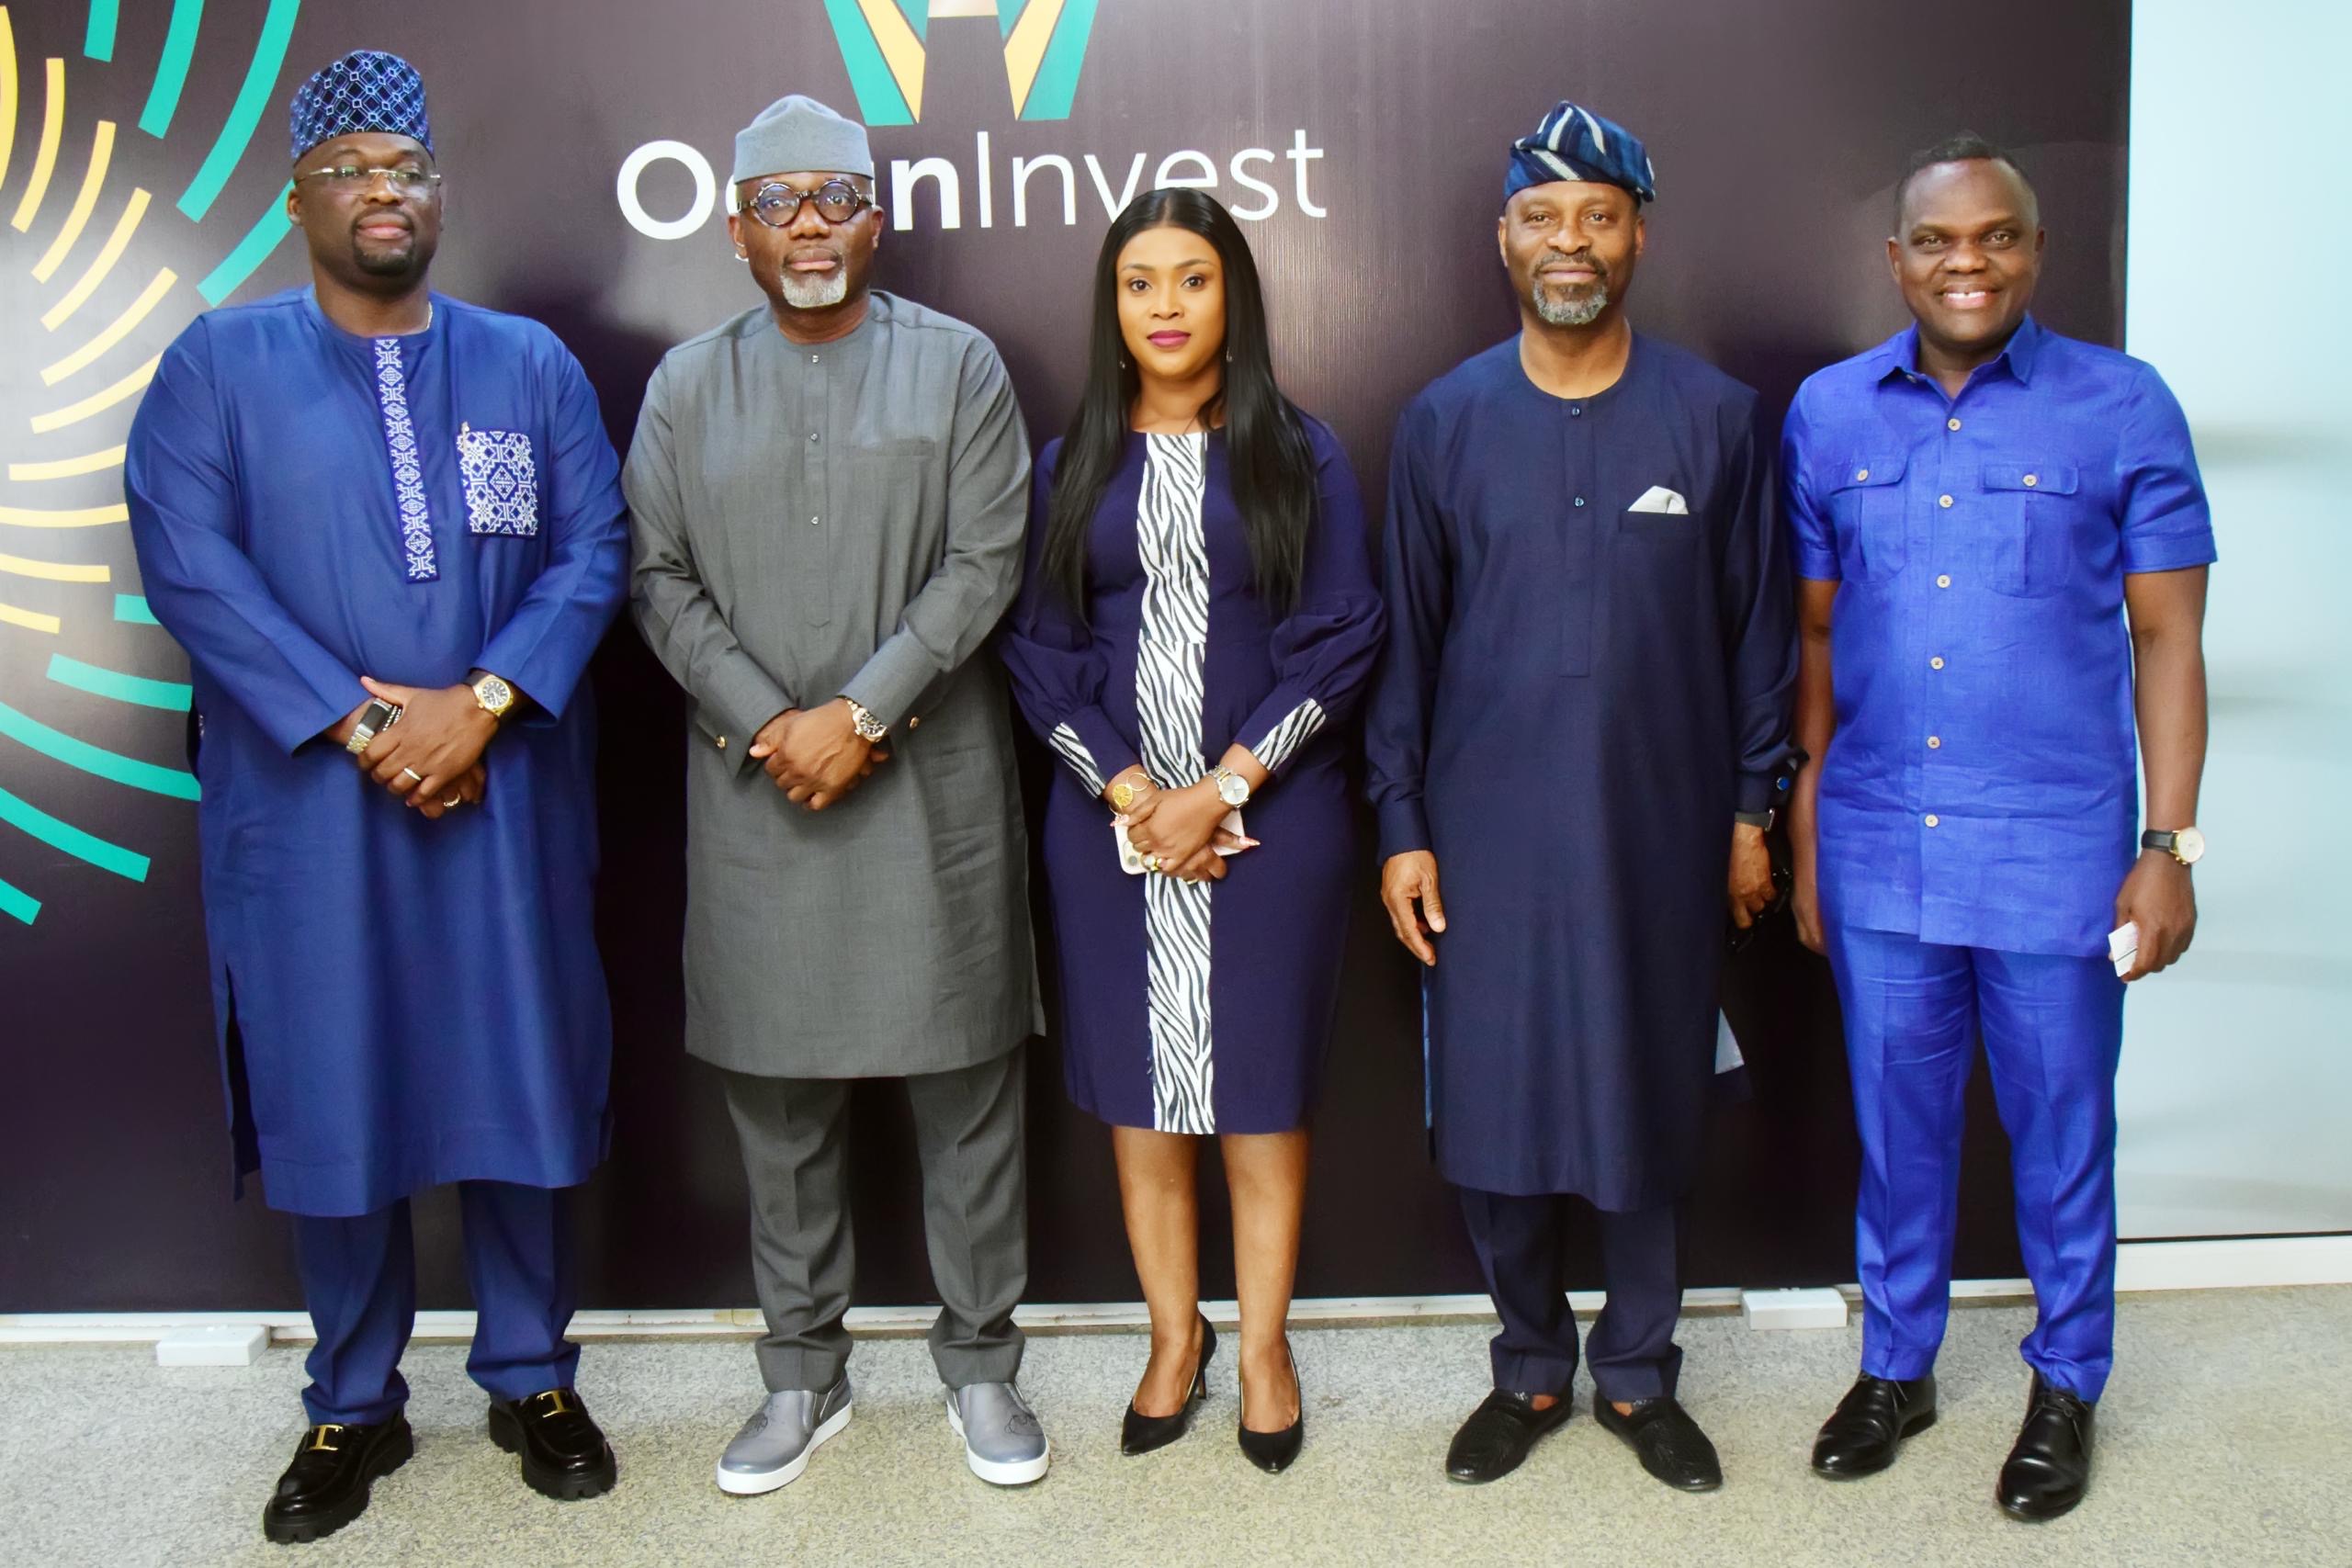 Ogun Inaugurates a 12-member Committee to Drive Investments into the State